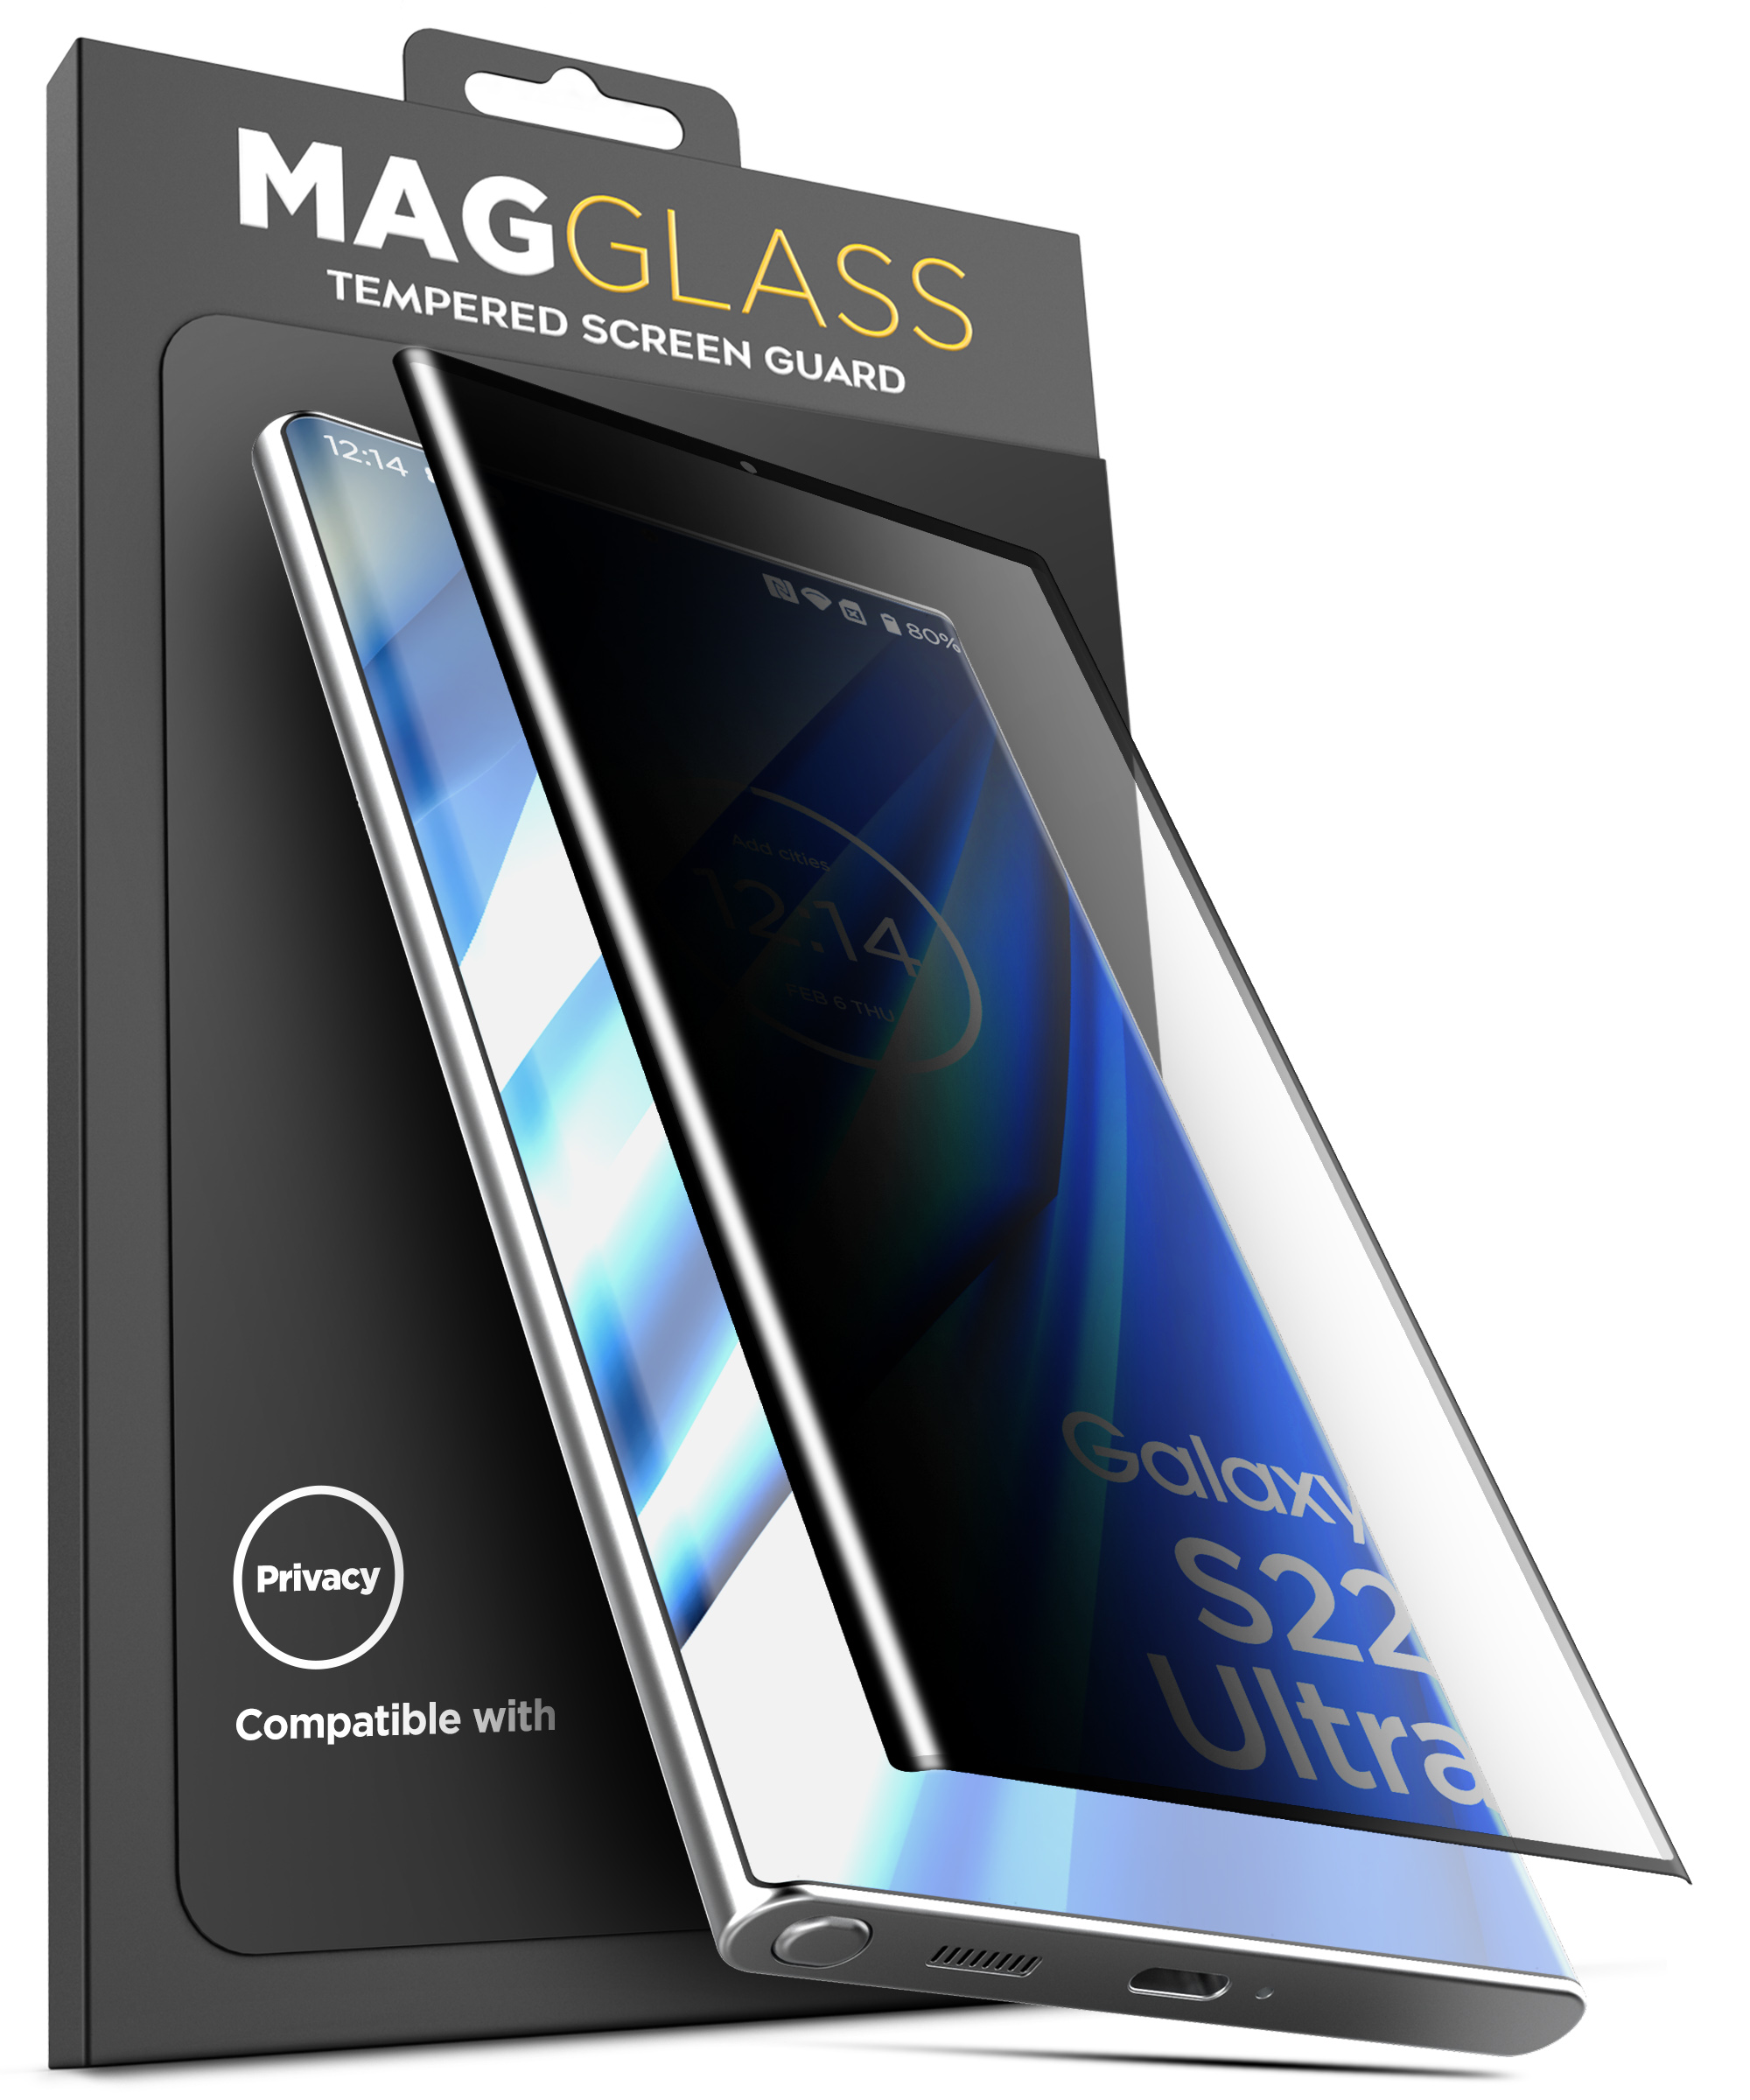 Magglass Privacy Guard for Samsung Galaxy S22 Ultra Screen Protector, 3D Curved Tempered Glass (s22-ultra 6.8) Not Compatible with Fingerprint